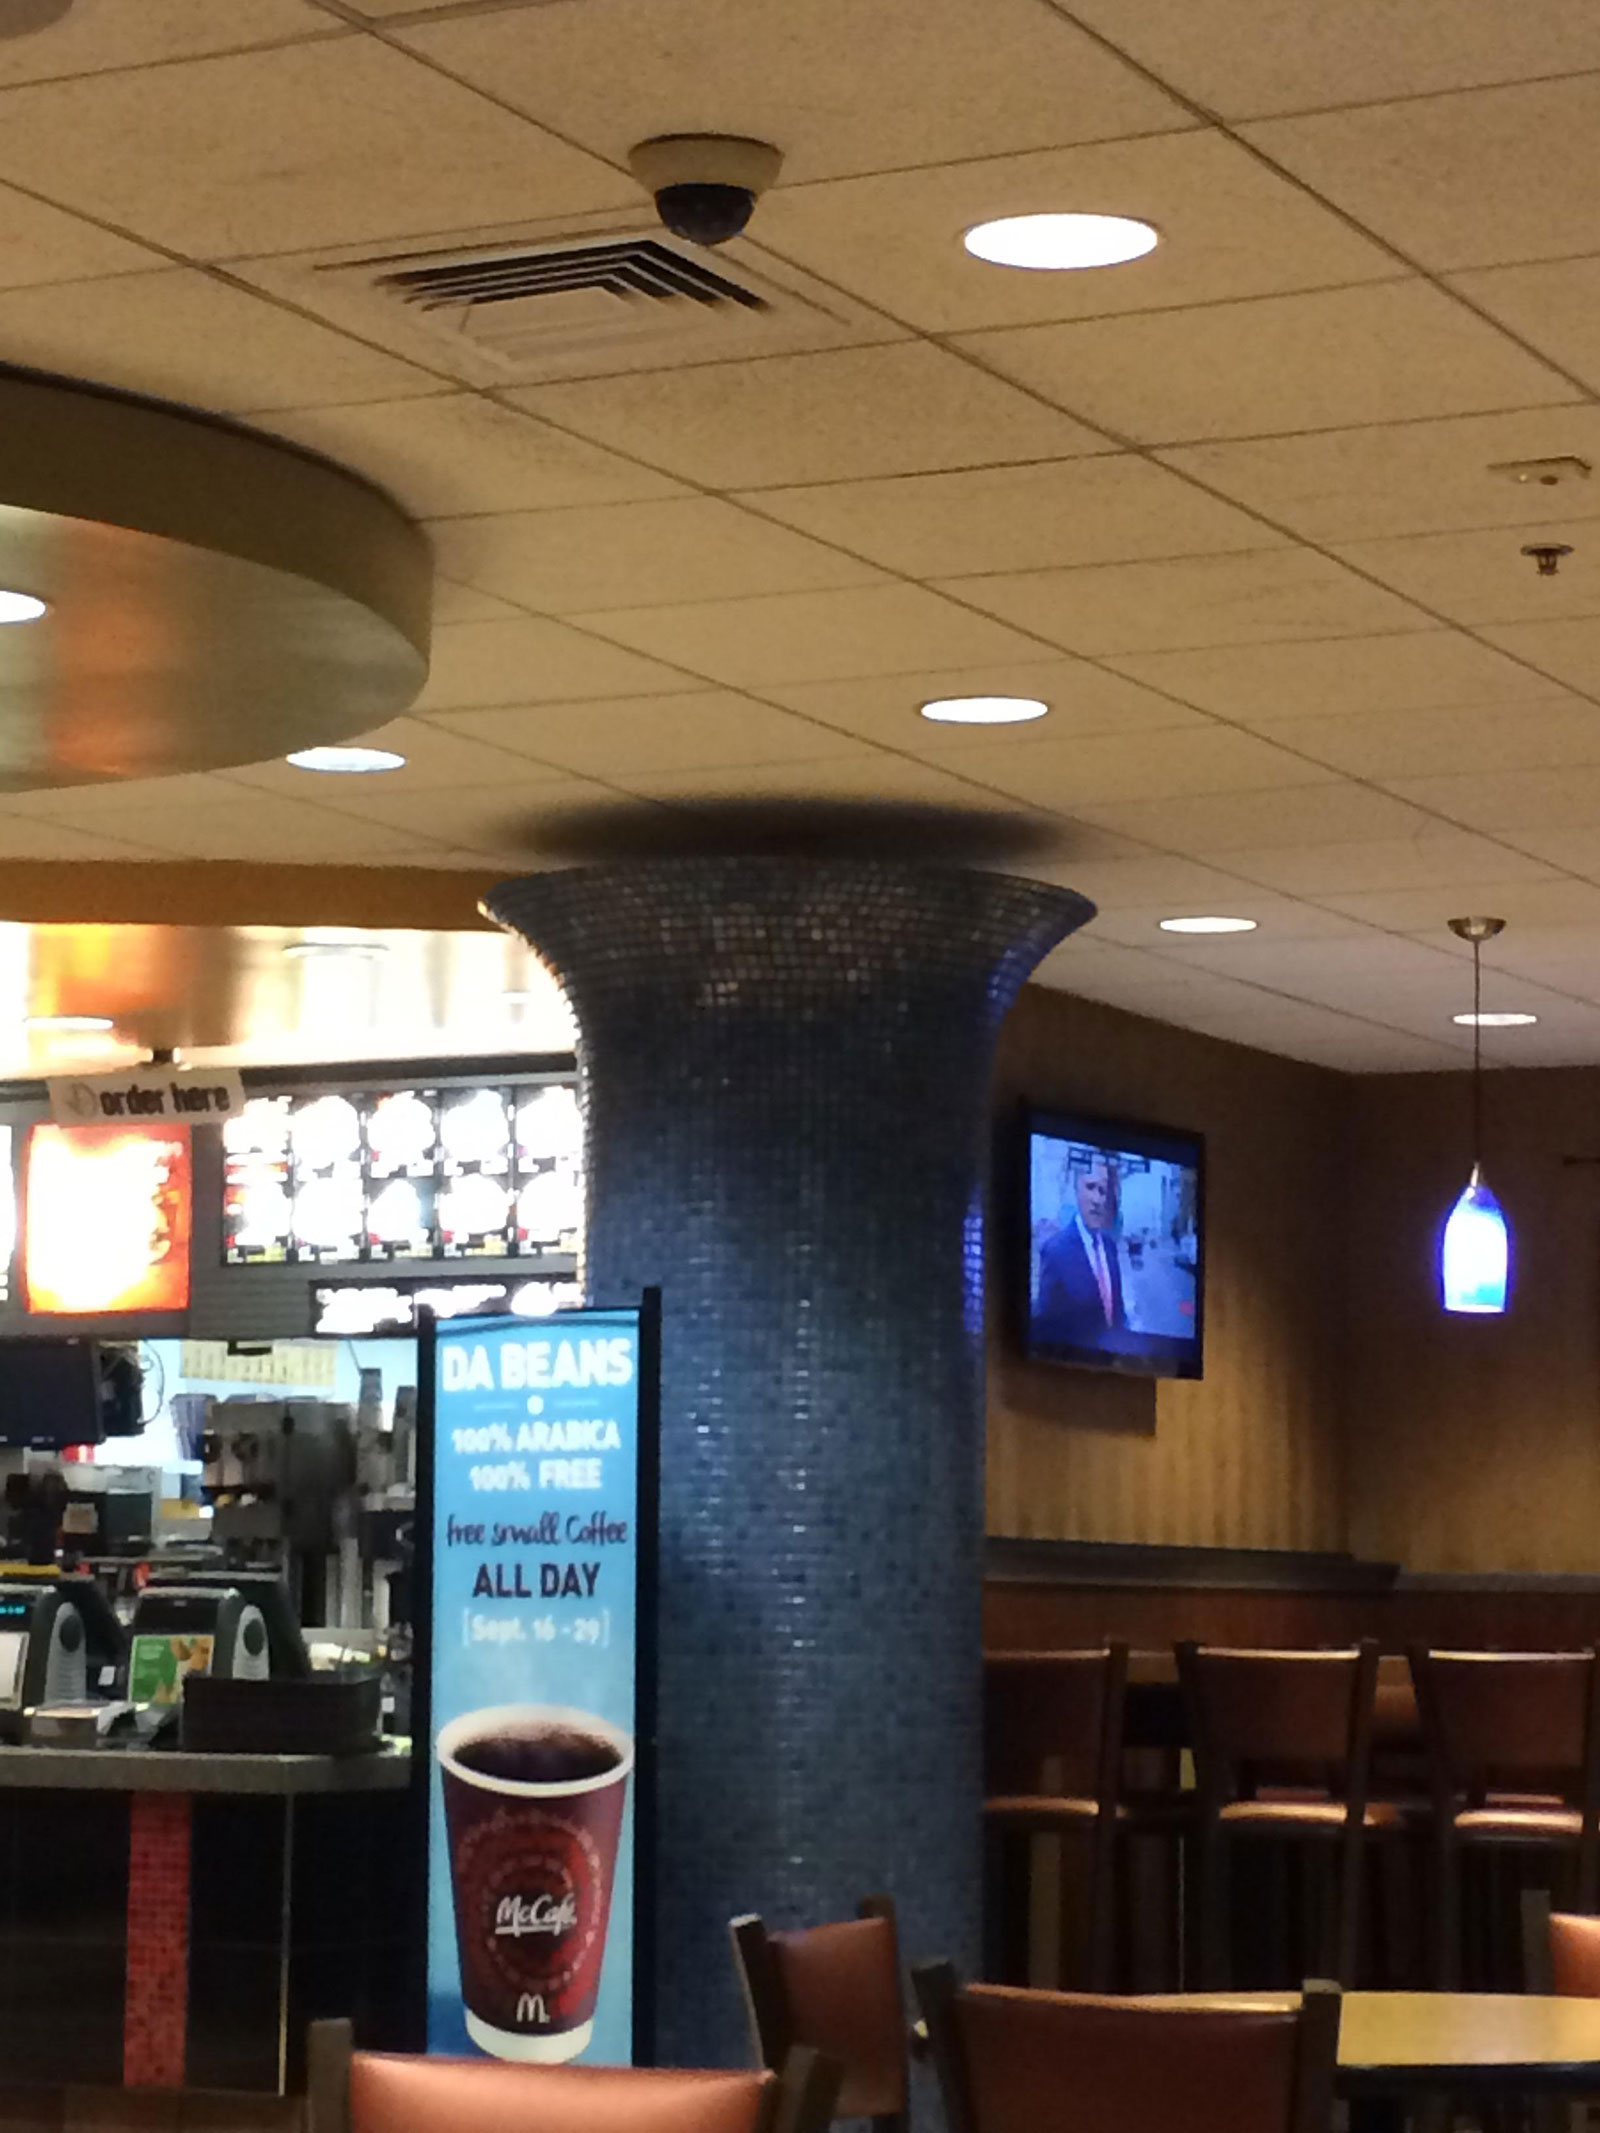 This pillar that doesn't even reach the ceiling